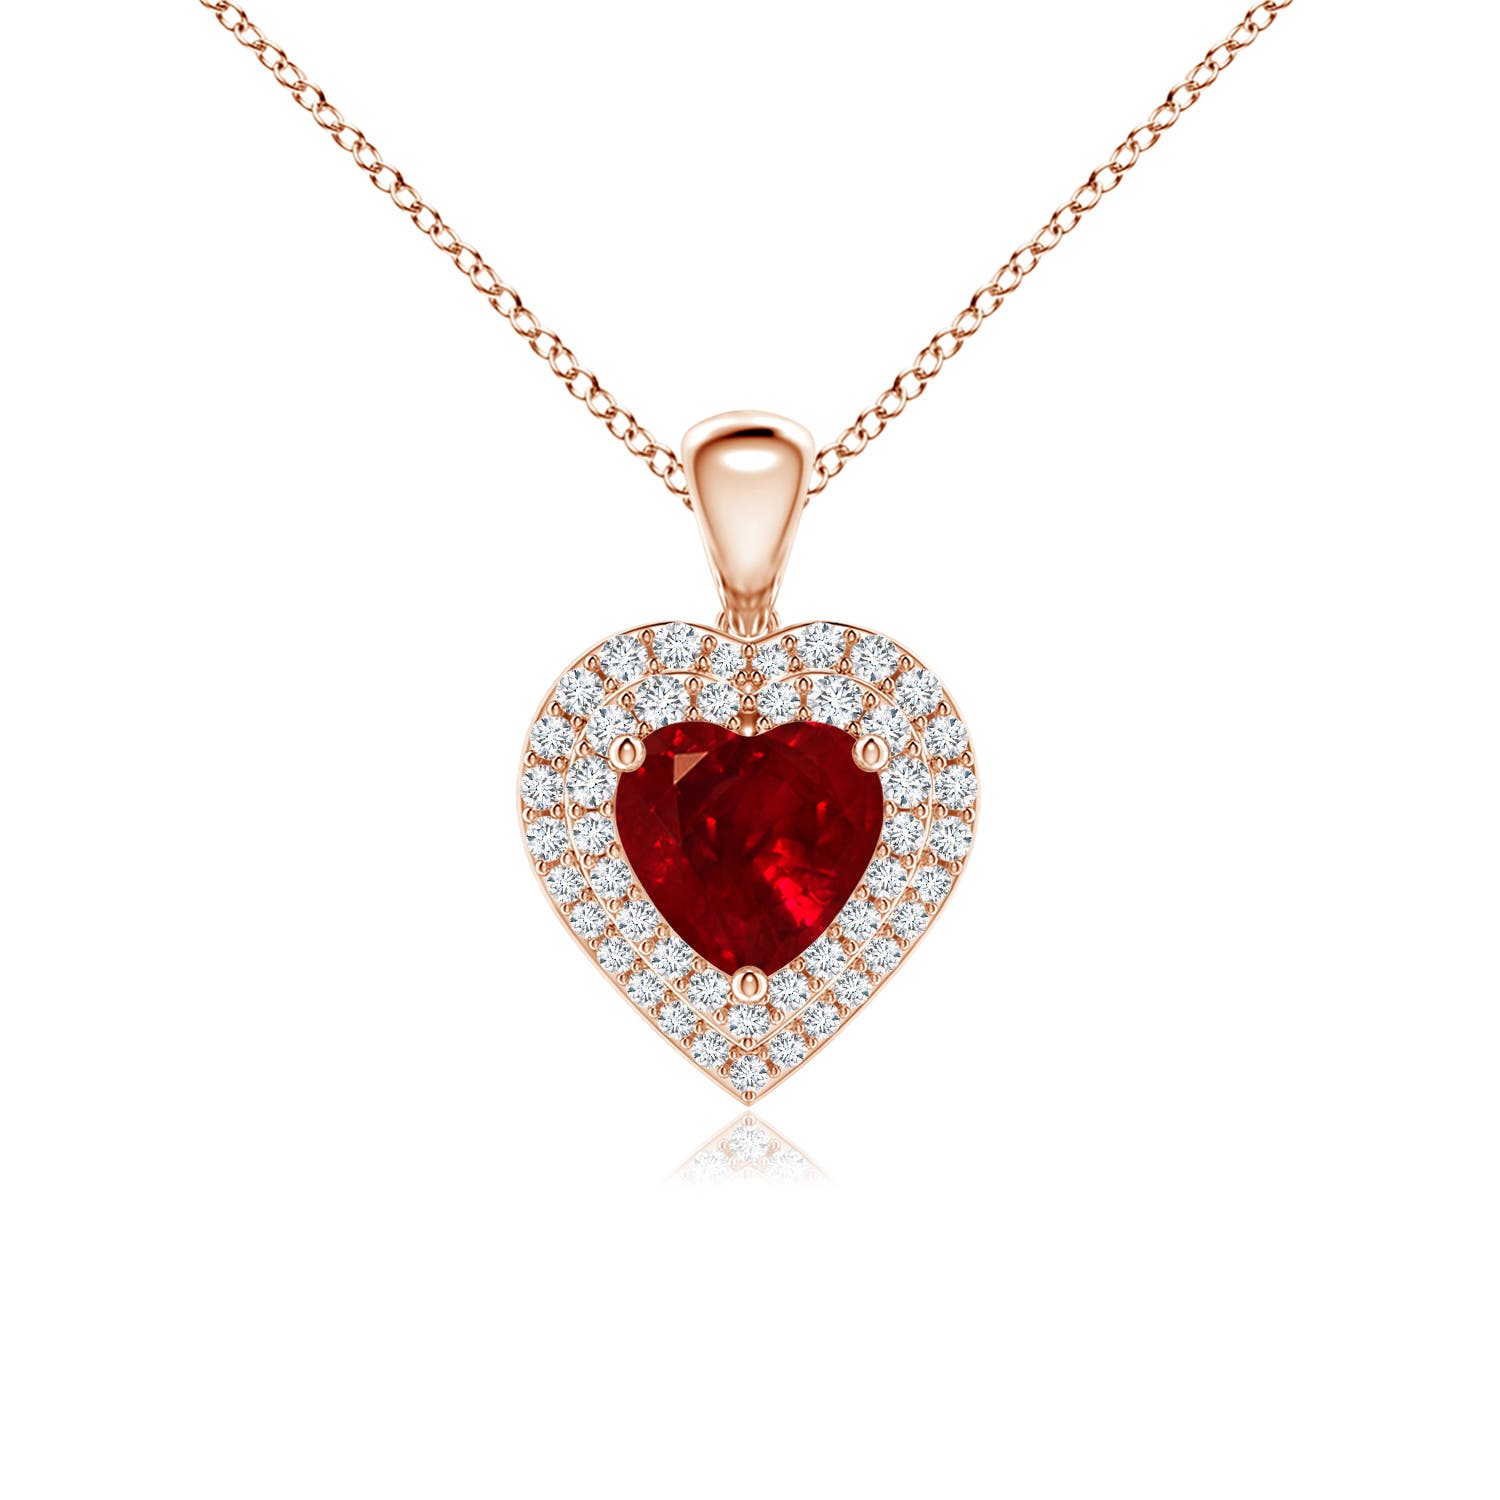 AAAA - Ruby / 1.25 CT / 14 KT Rose Gold